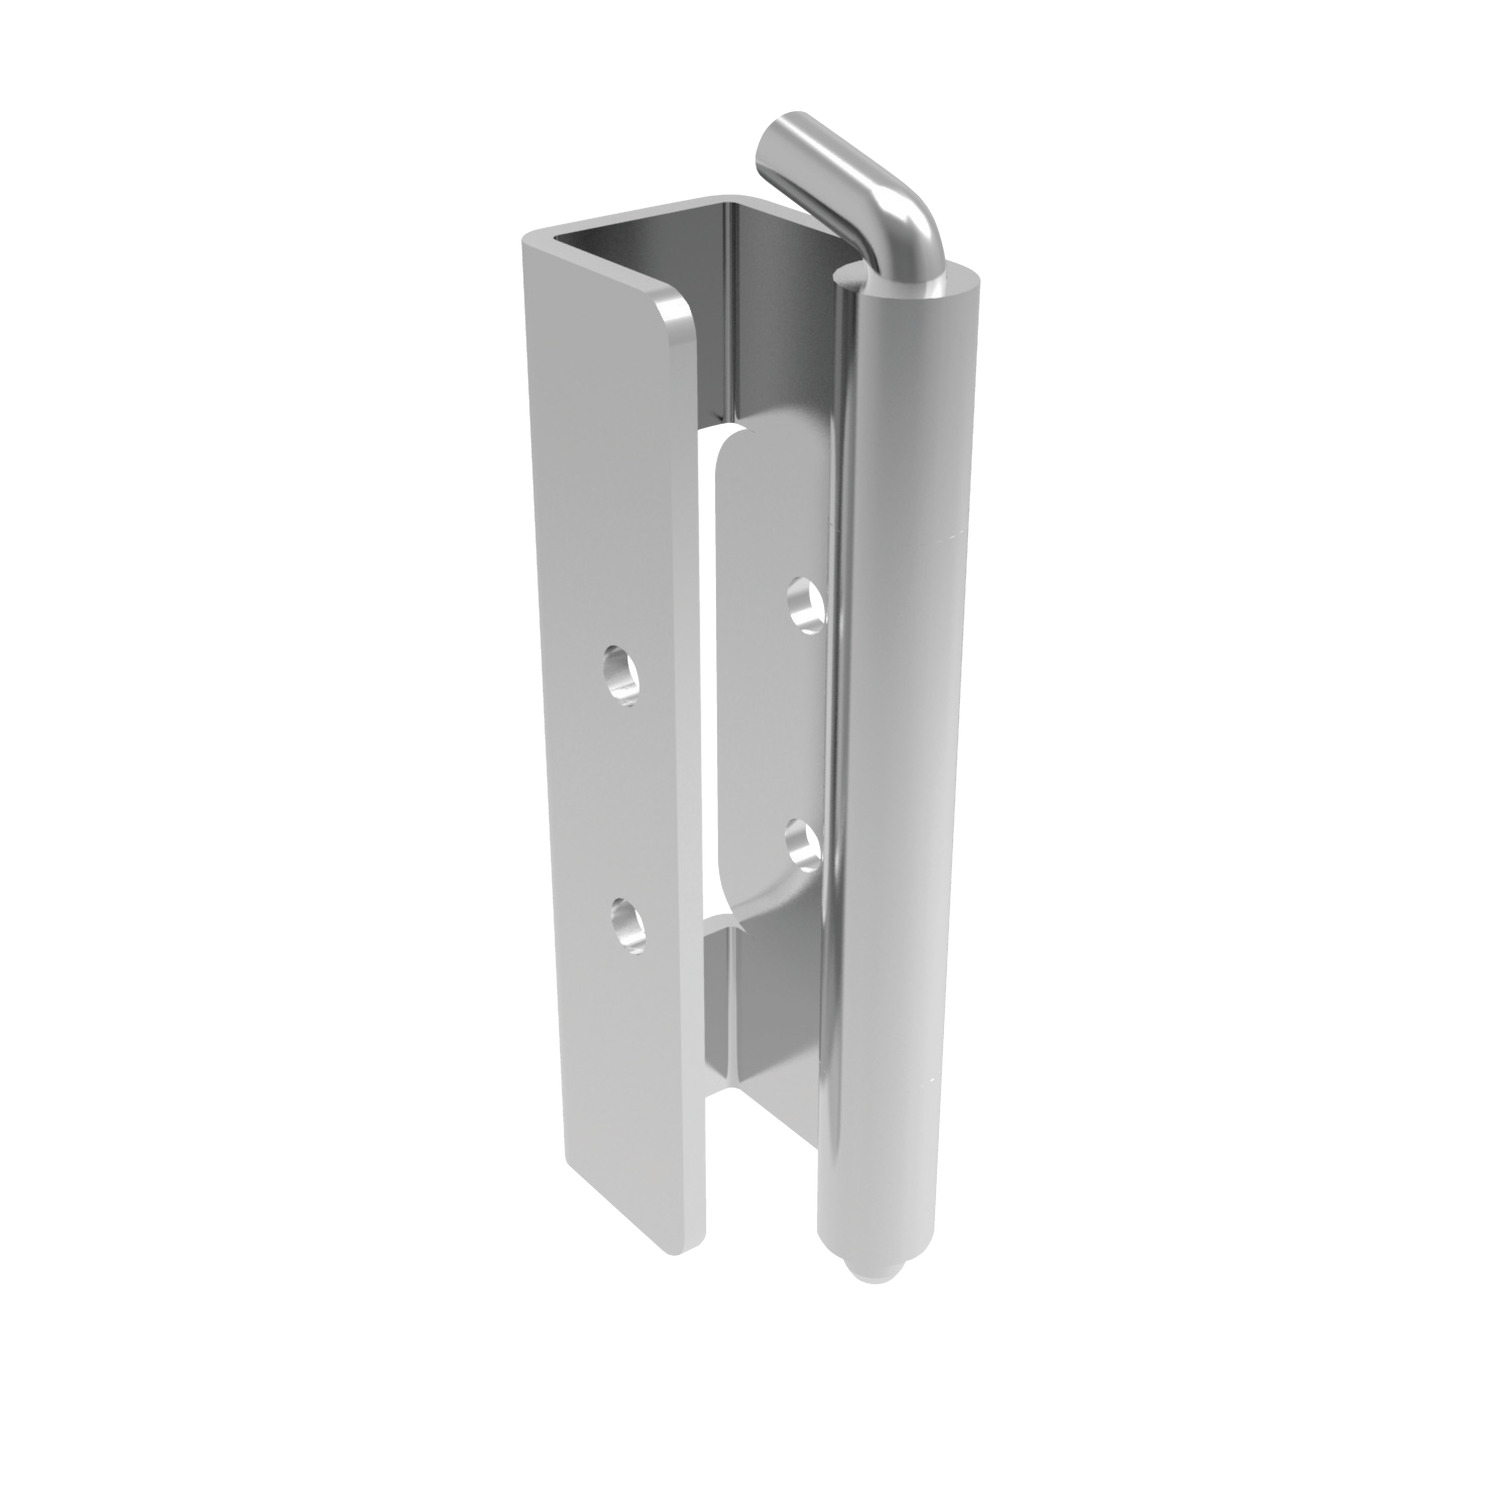 S2156 - Concealed Pivot Hinges - Lift Off